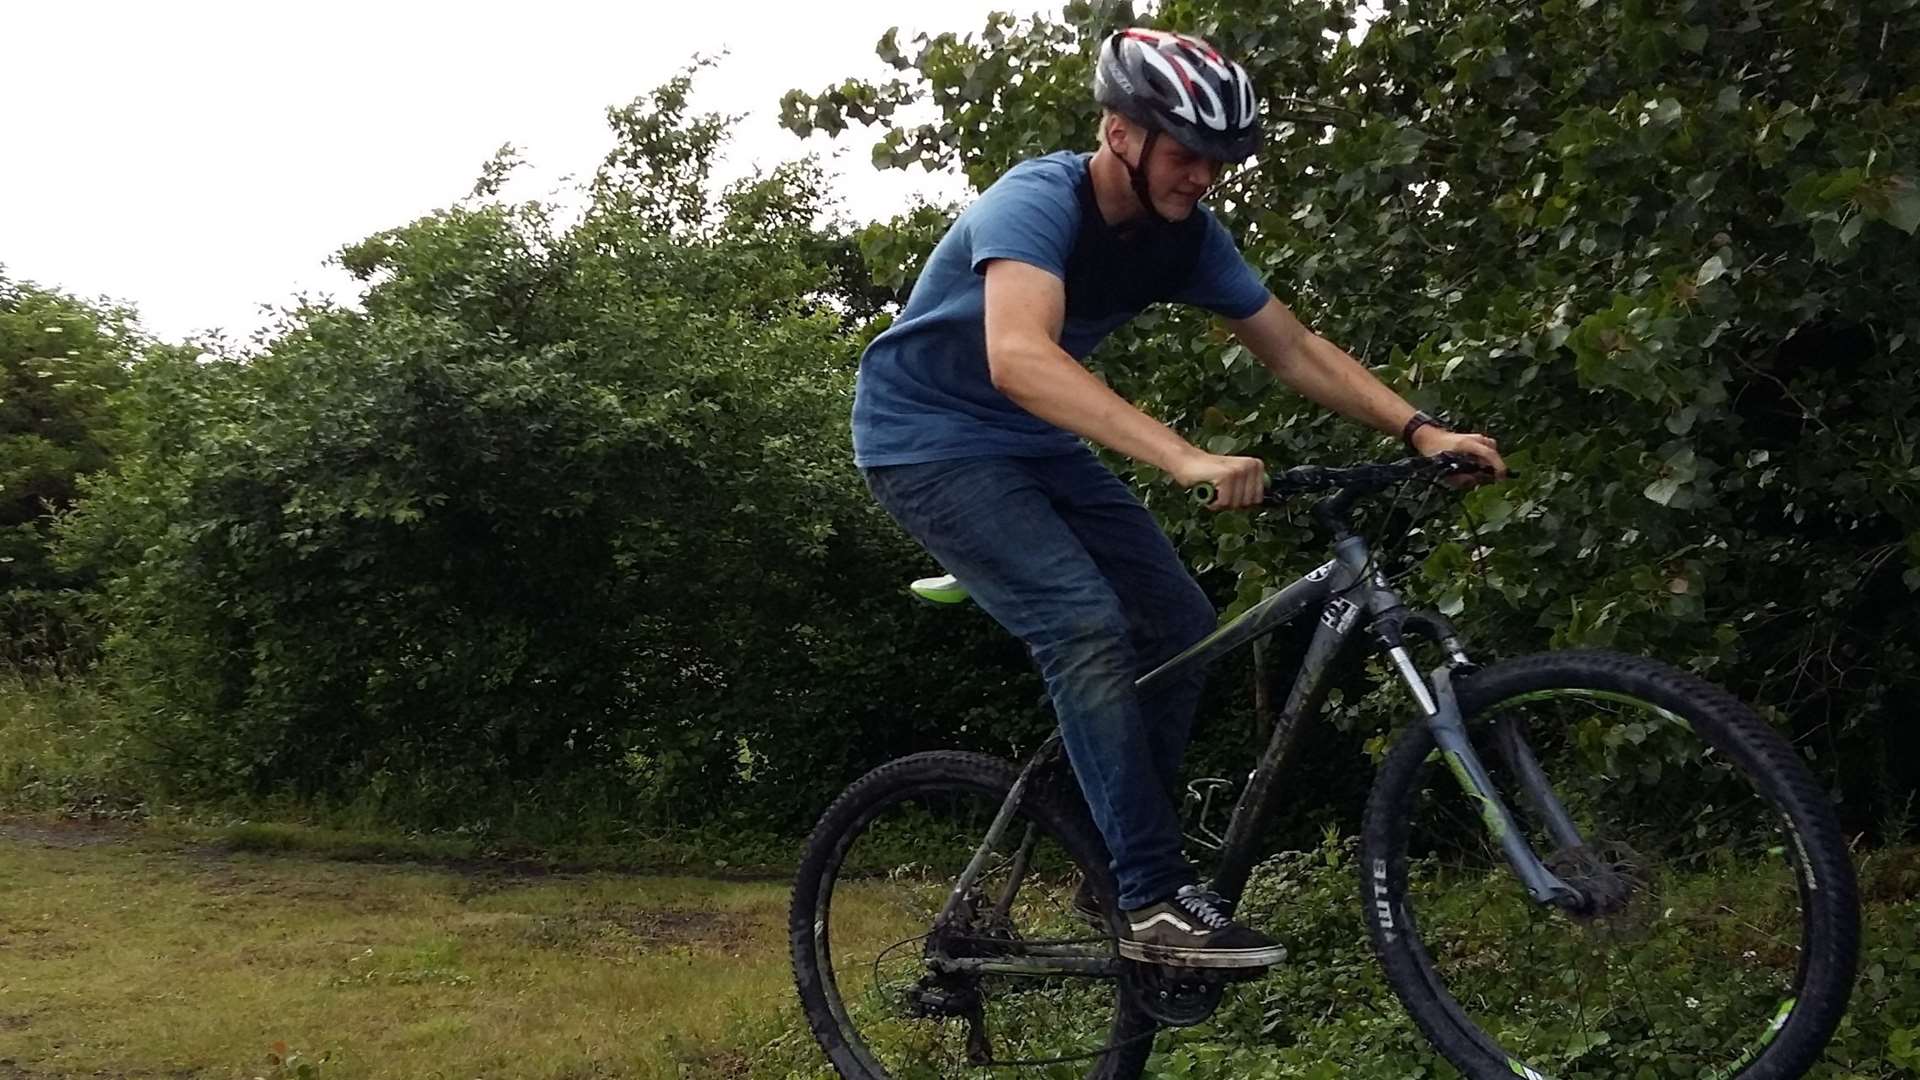 Ben on his bike at Betteshanger Country Park, just two days before he died